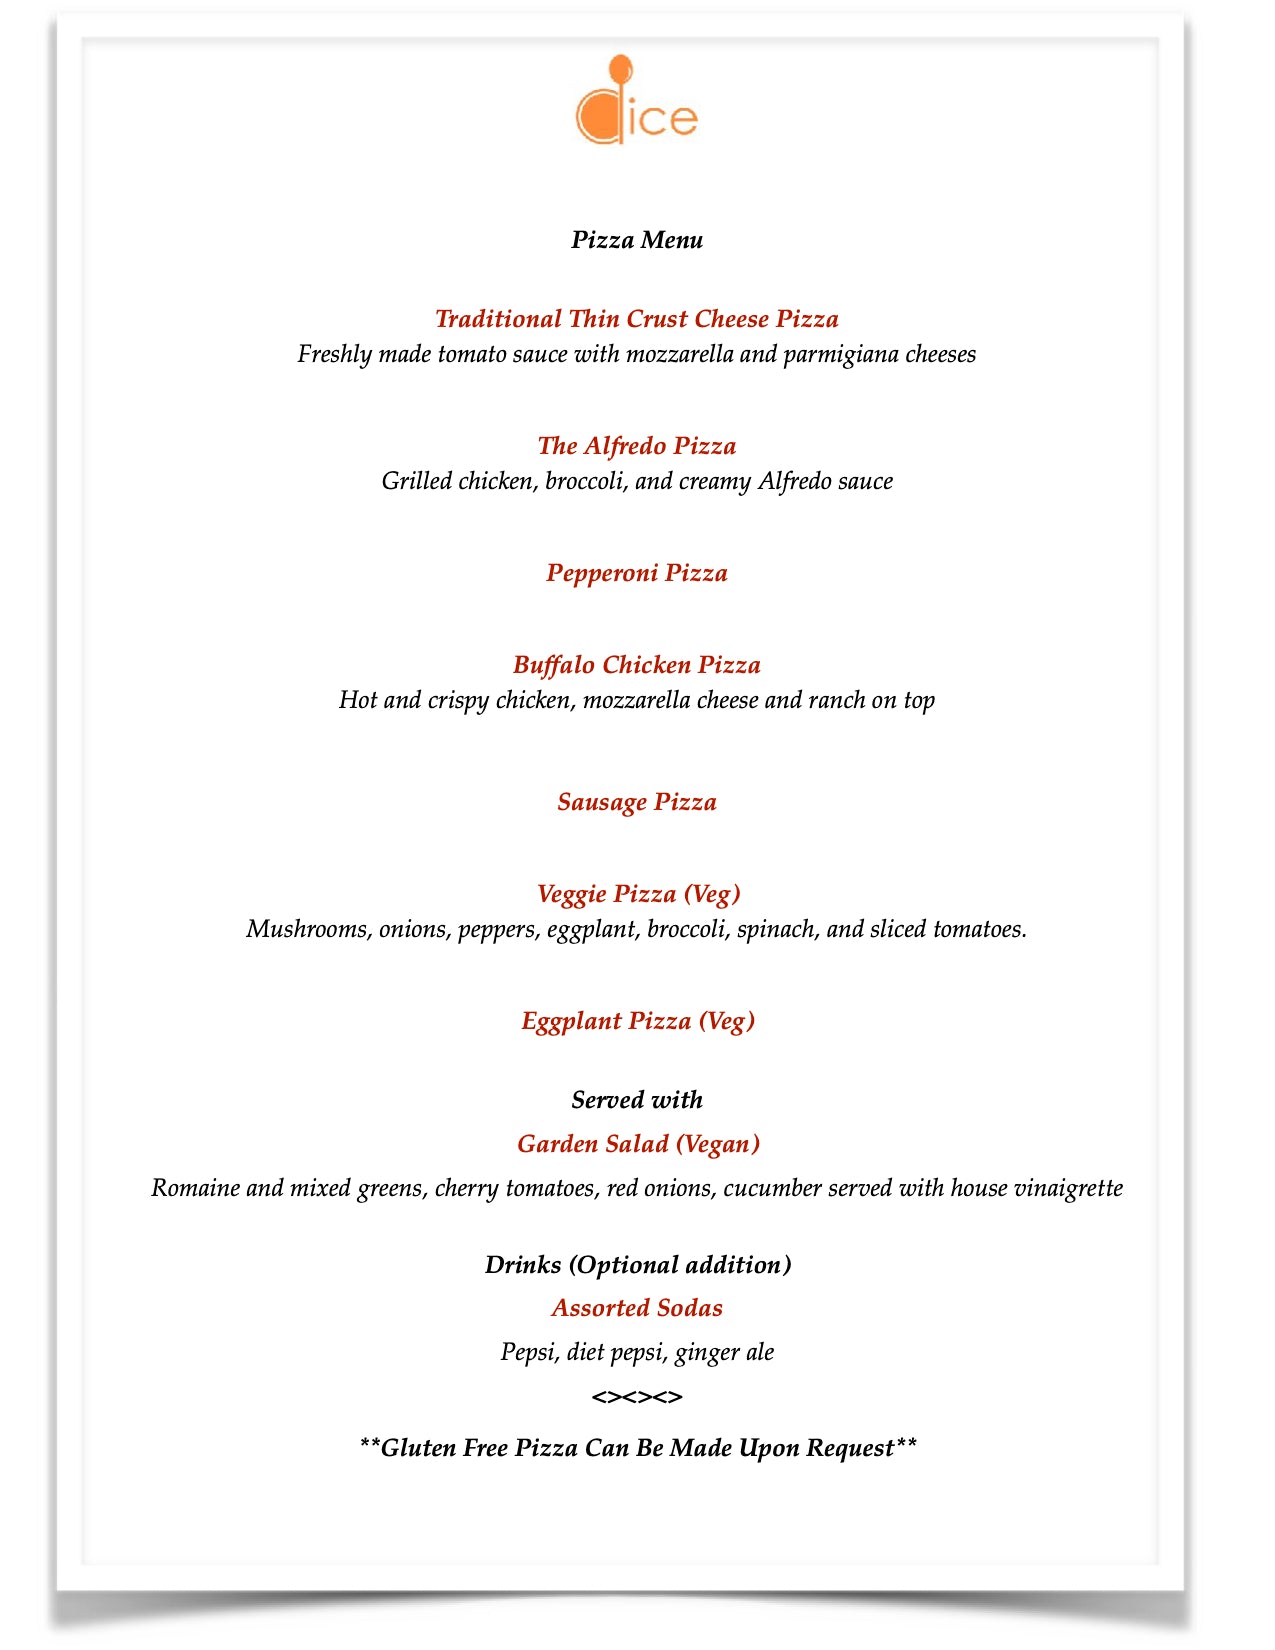 Catering near Boston - Pizza Party Menu (Extended)